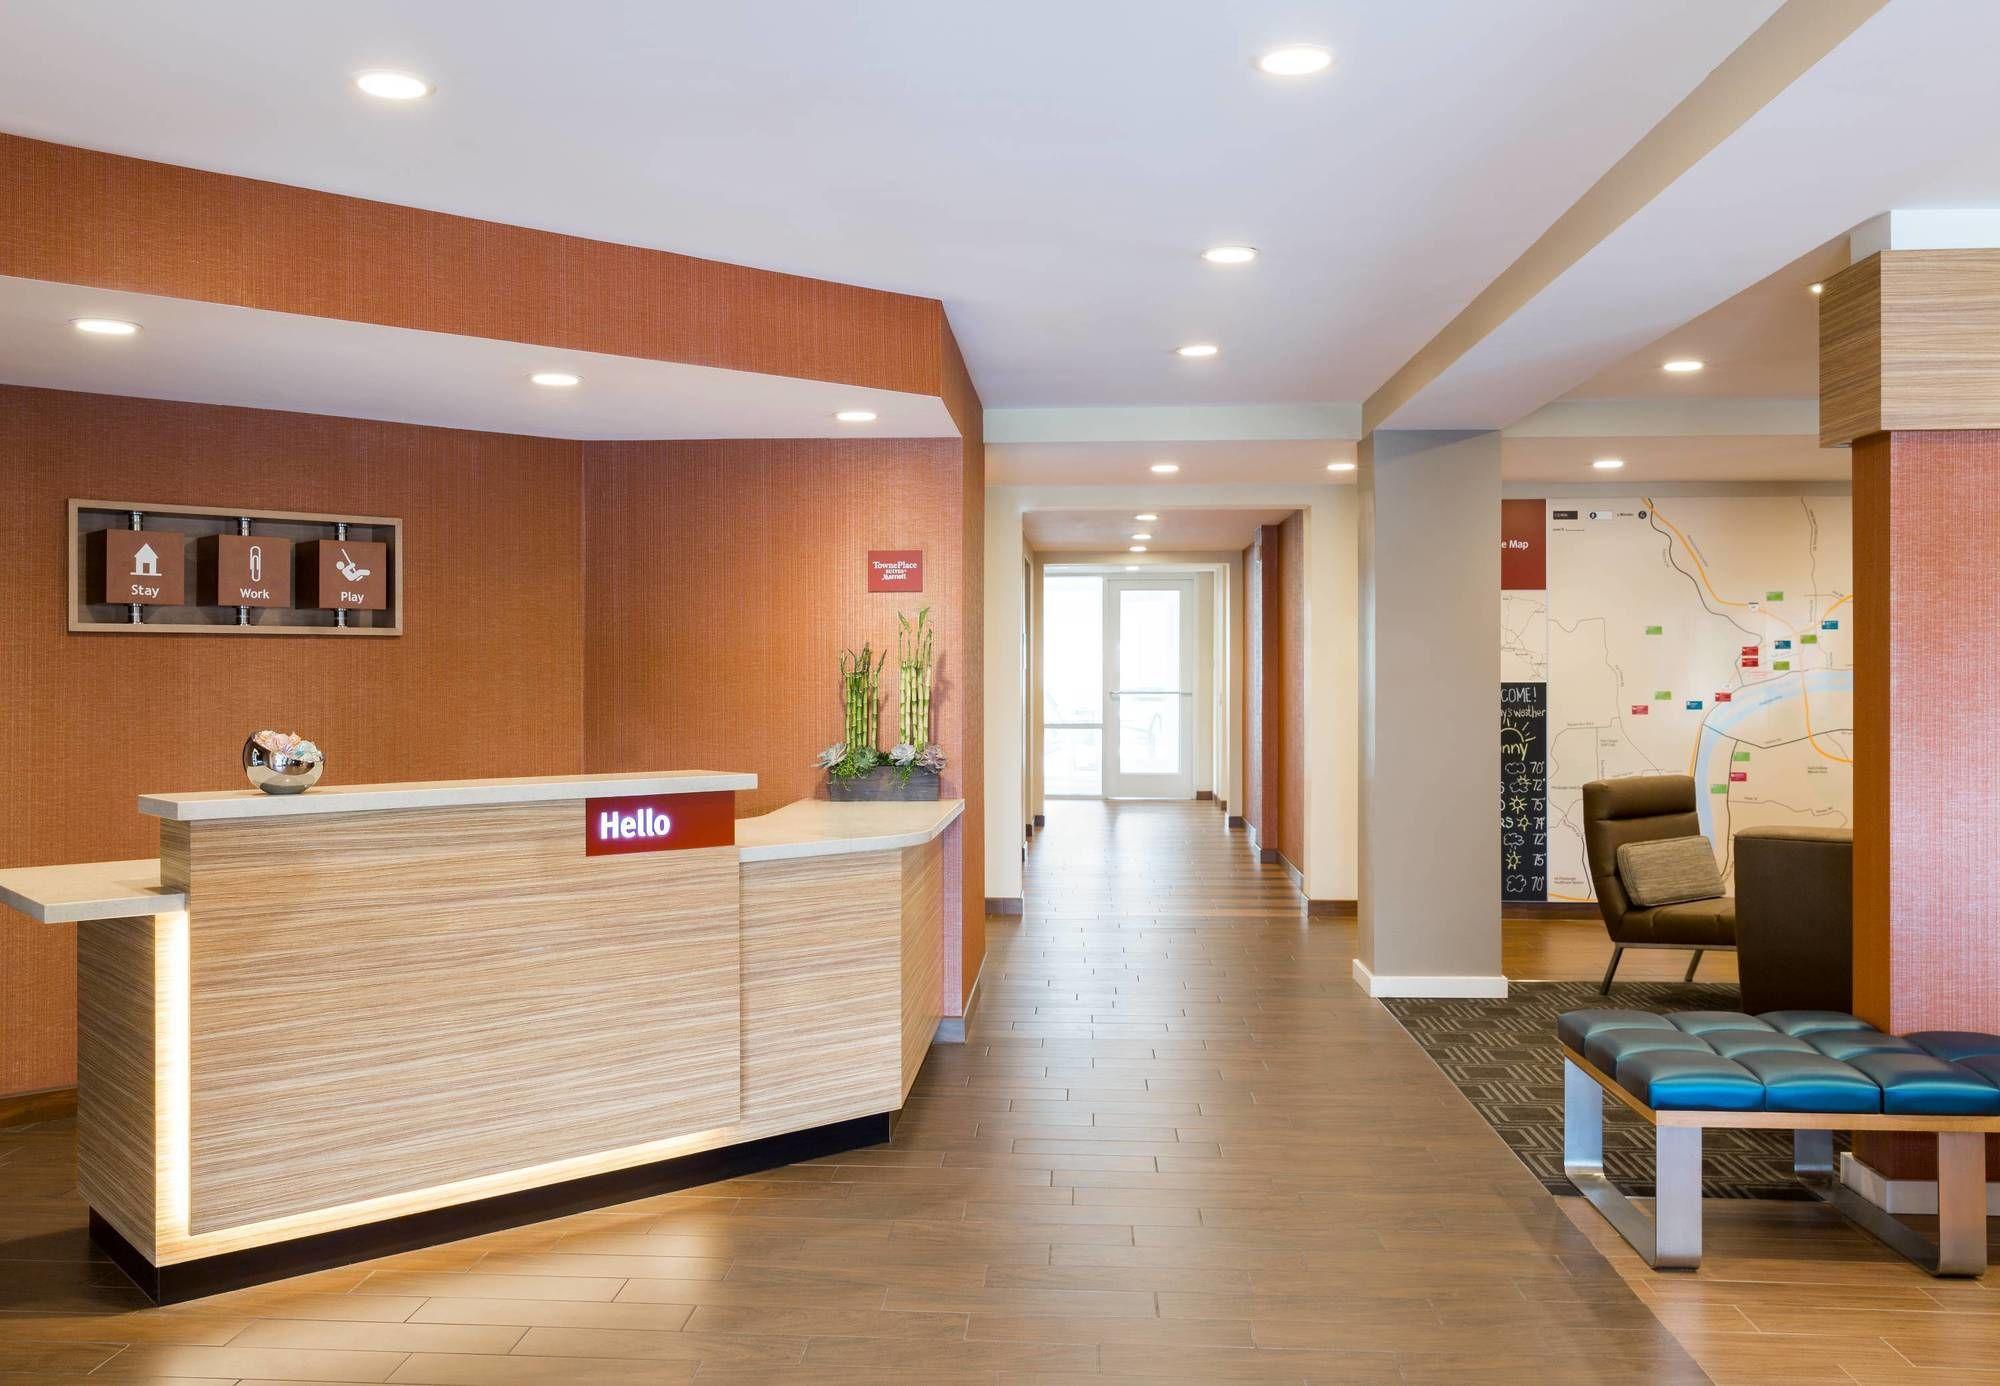 Towneplace Suites By Marriott Pittsburgh Harmarville Εξωτερικό φωτογραφία